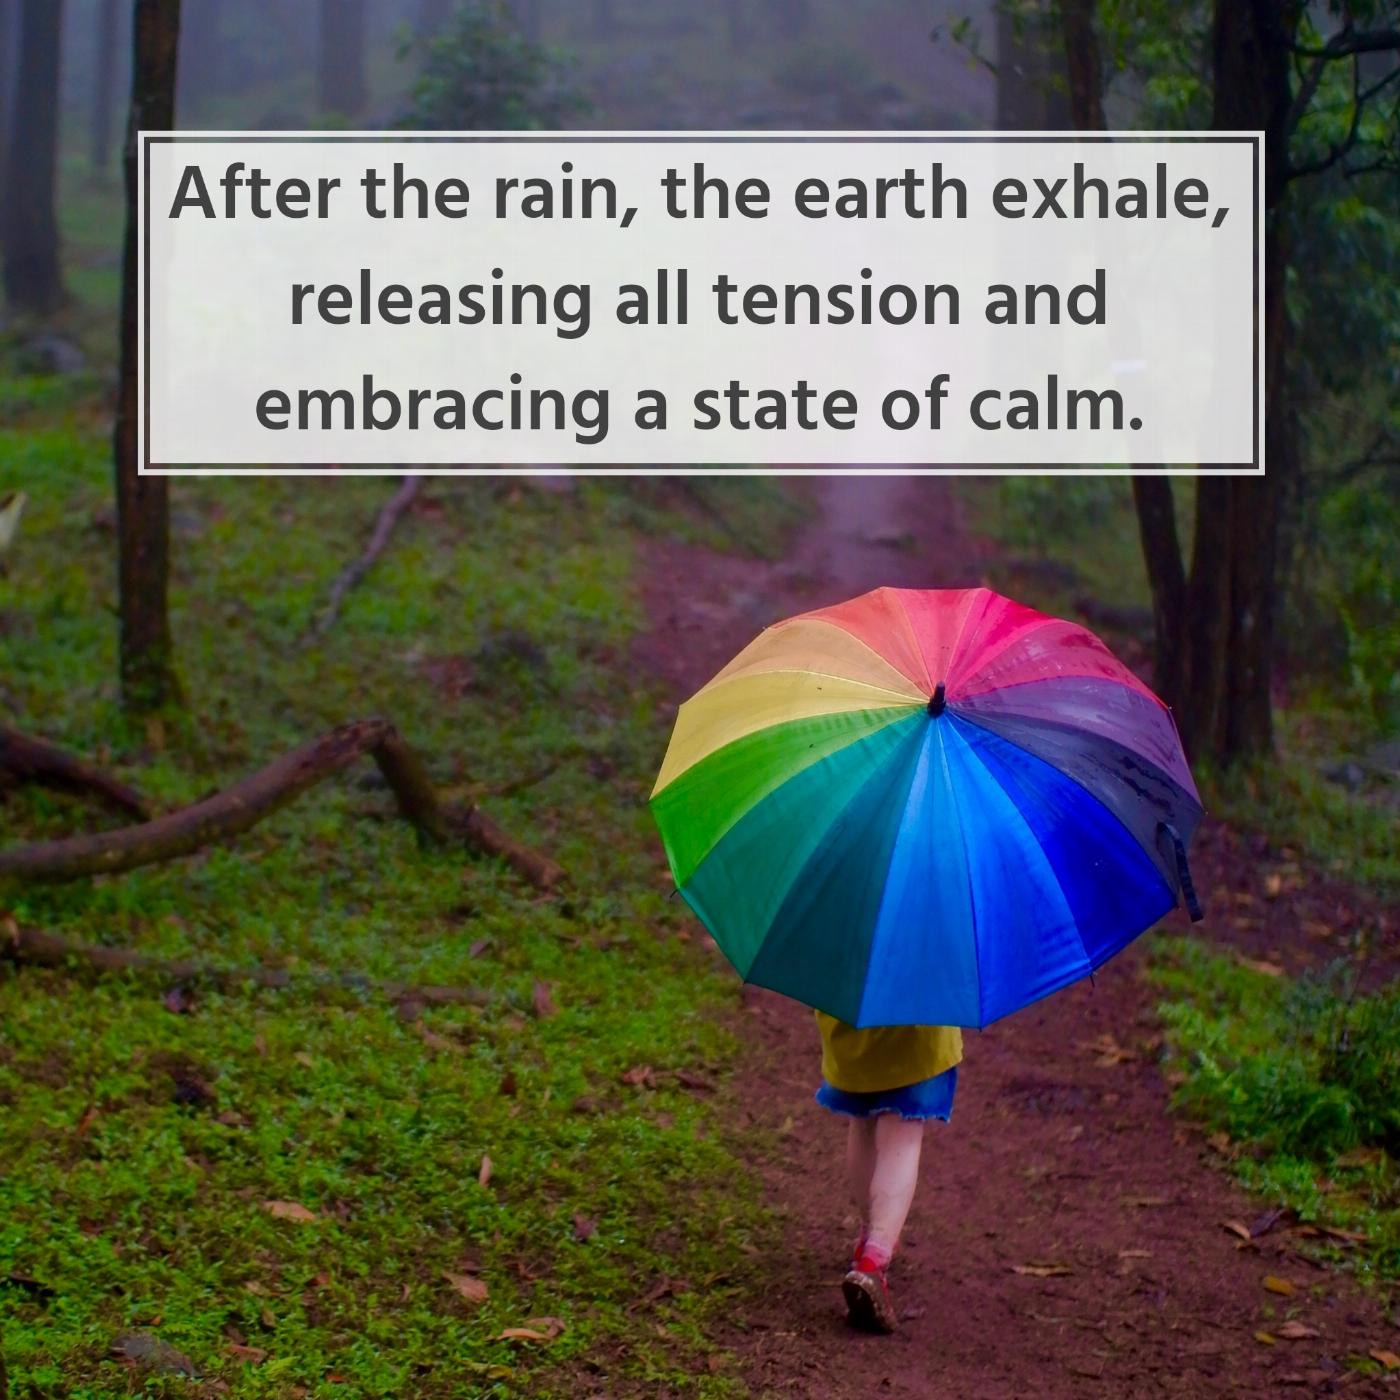 After the rain the earth exhale releasing all tension